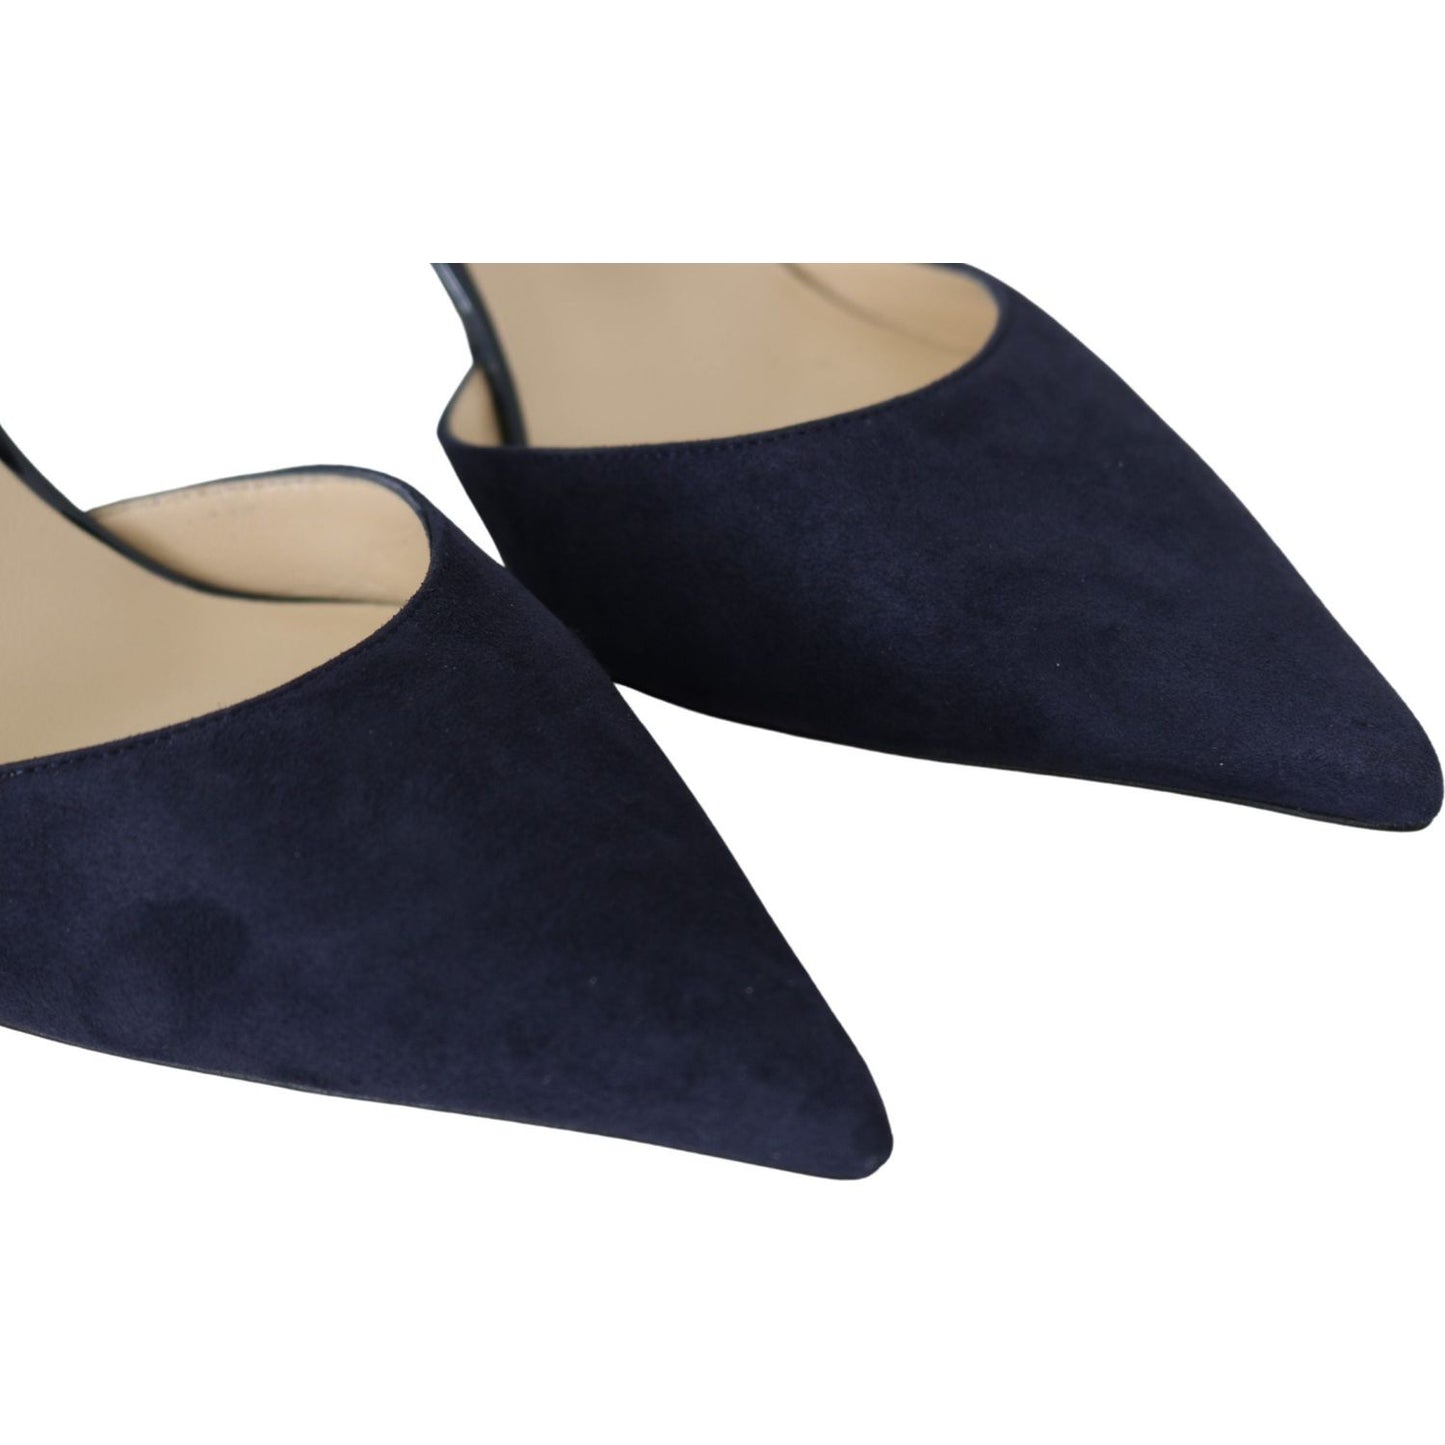 Jimmy Choo Elegant Navy Suede Pointed Toe Pumps navy-blue-leather-darylin-85-pumps-shoes